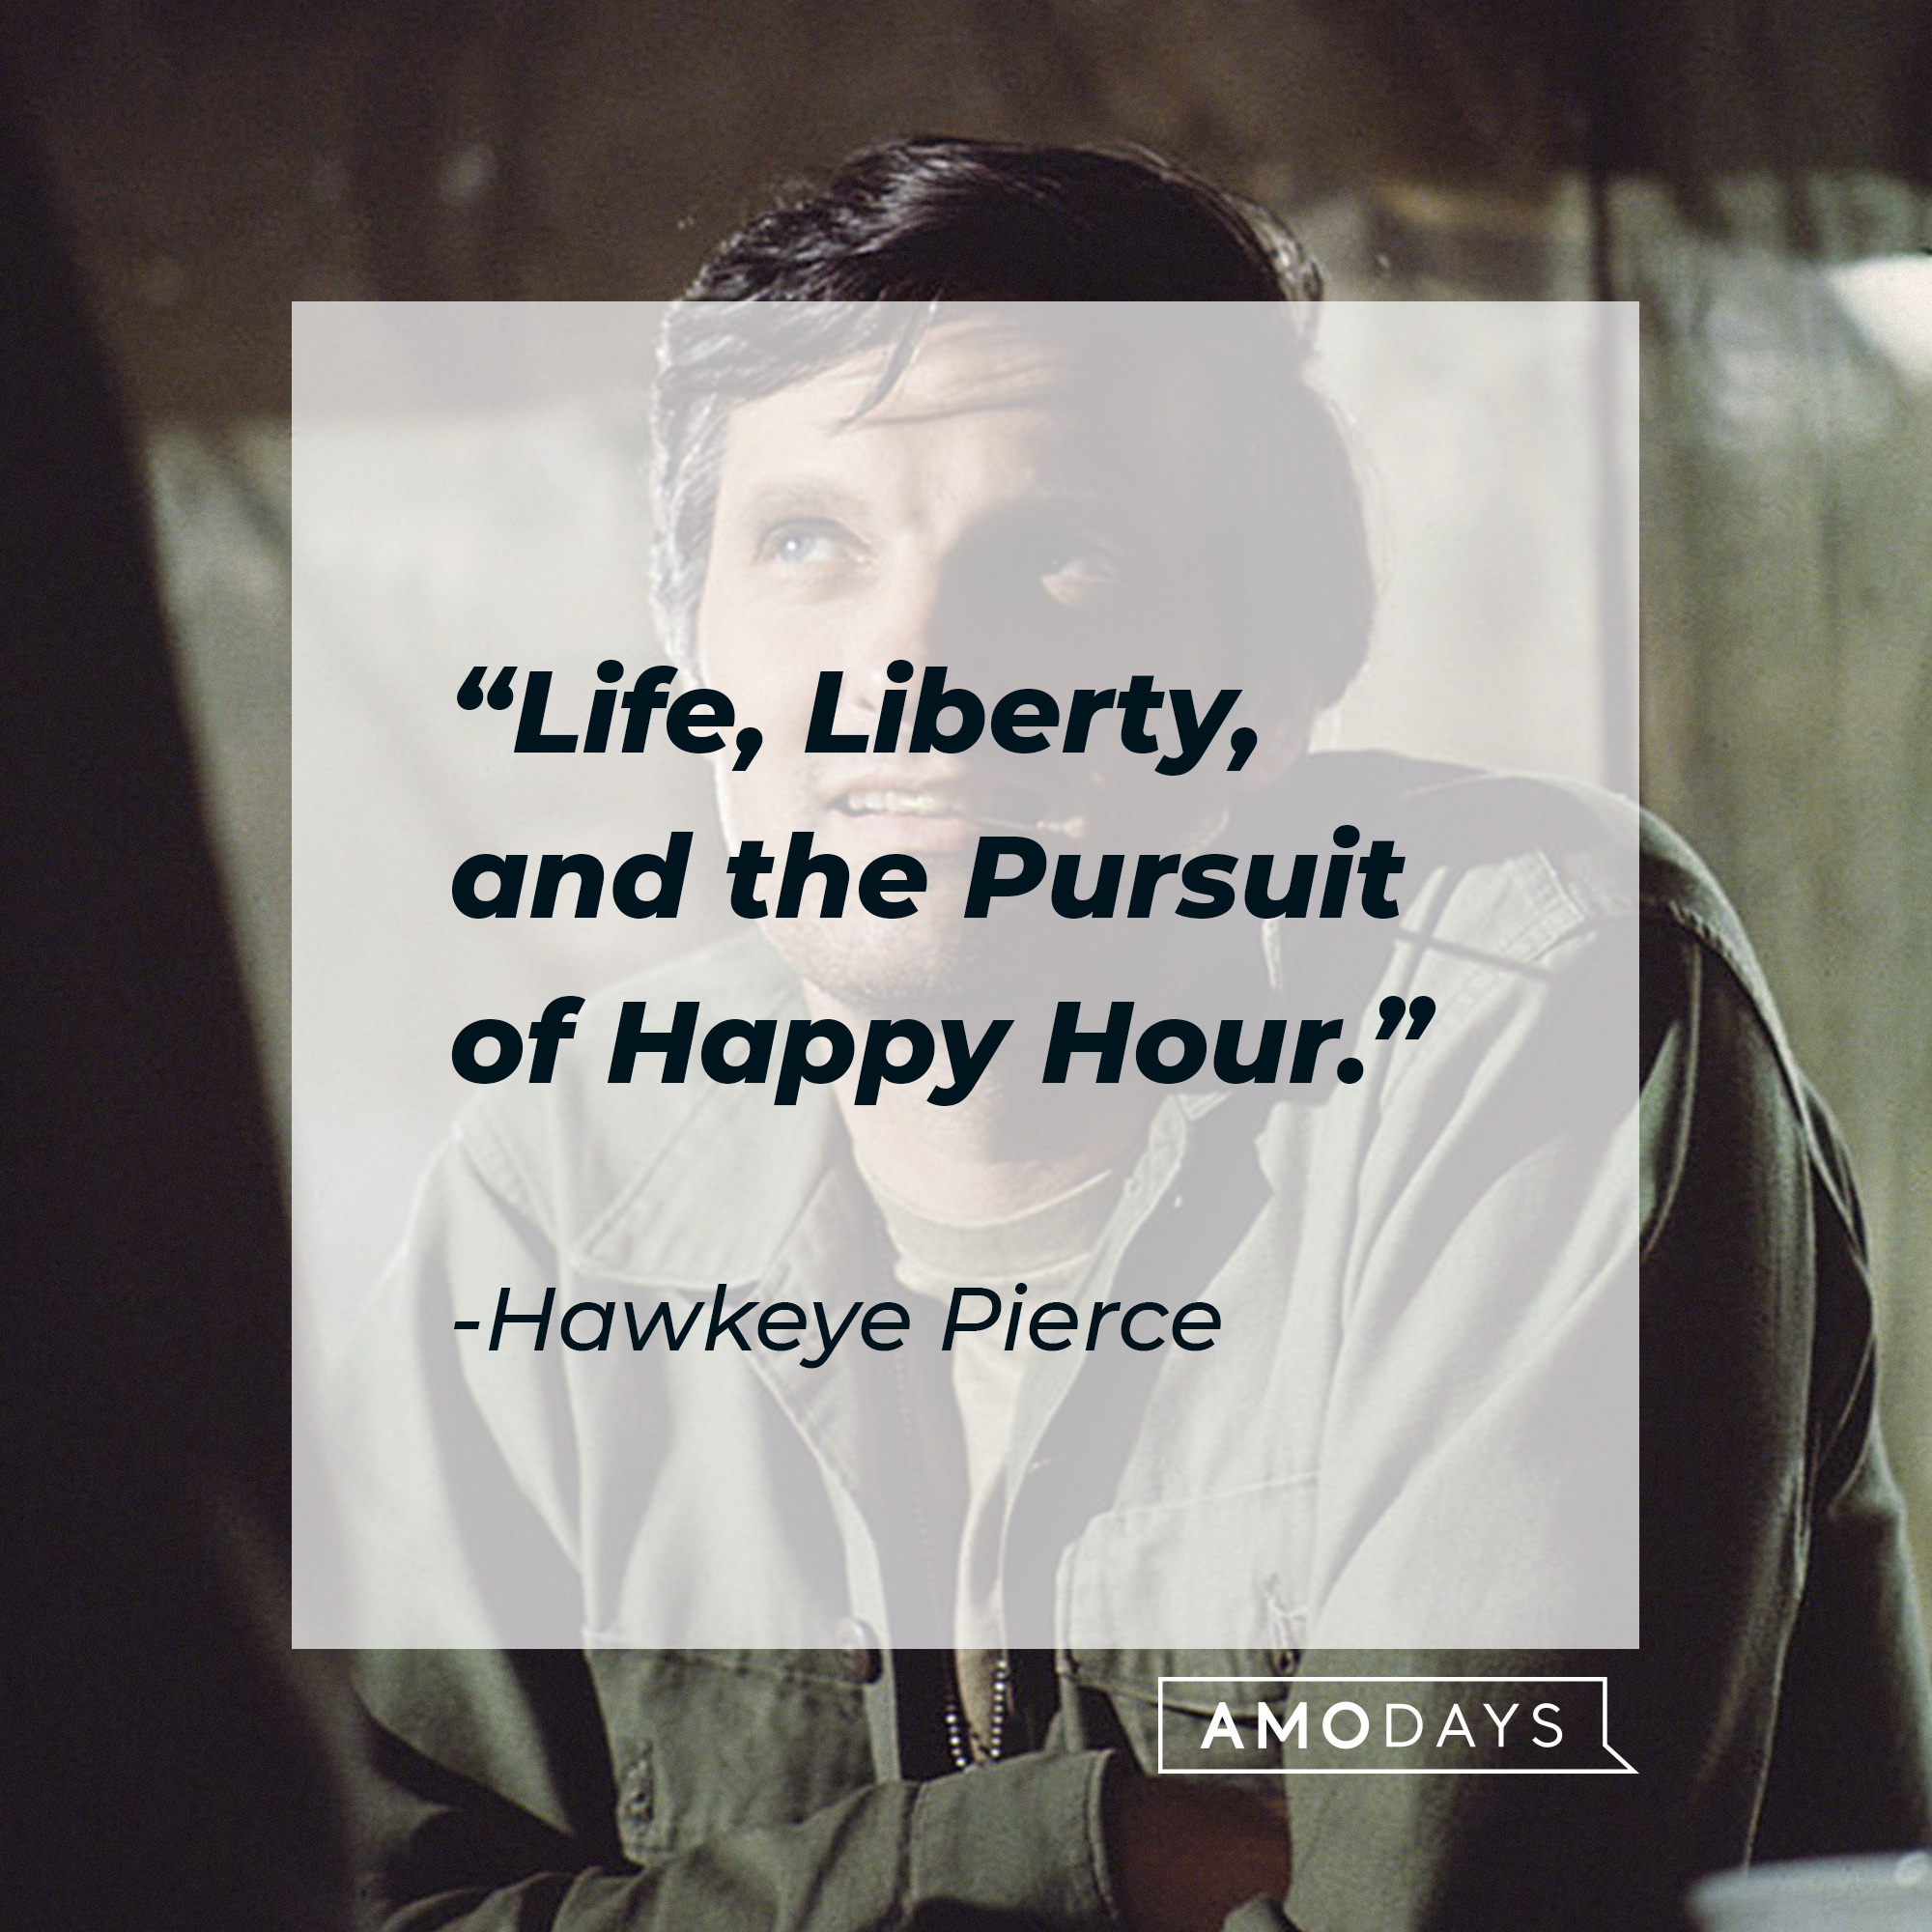 Hawkeye Pierce's quote: "Life, Liberty, and the Pursuit of Happy Hour." | Source: Getty Images